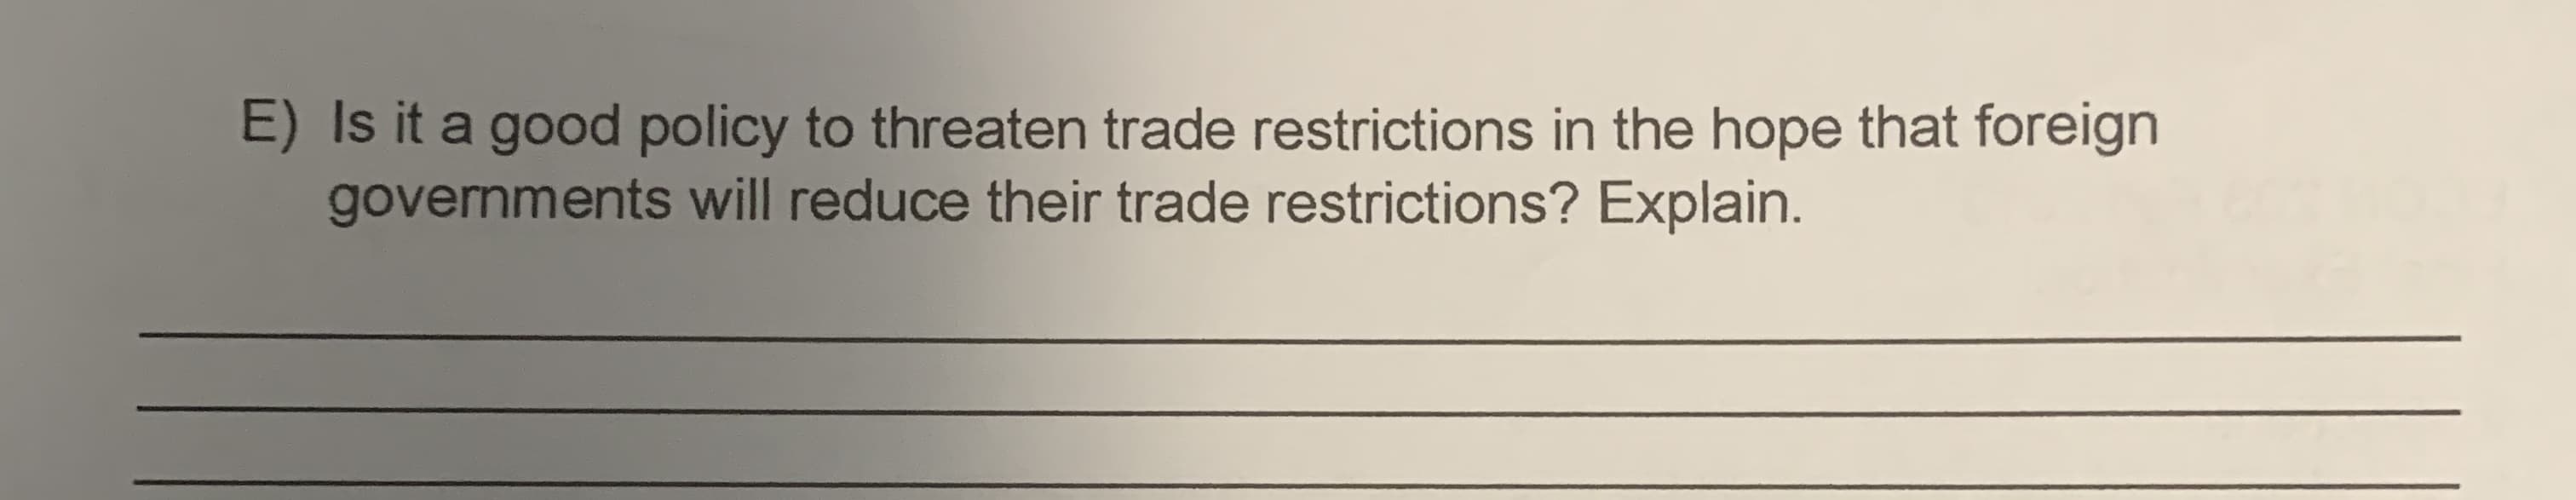 E) Is it a good policy to threaten trade restrictions in the hope that foreign
governments will reduce their trade restrictions? Explain.
